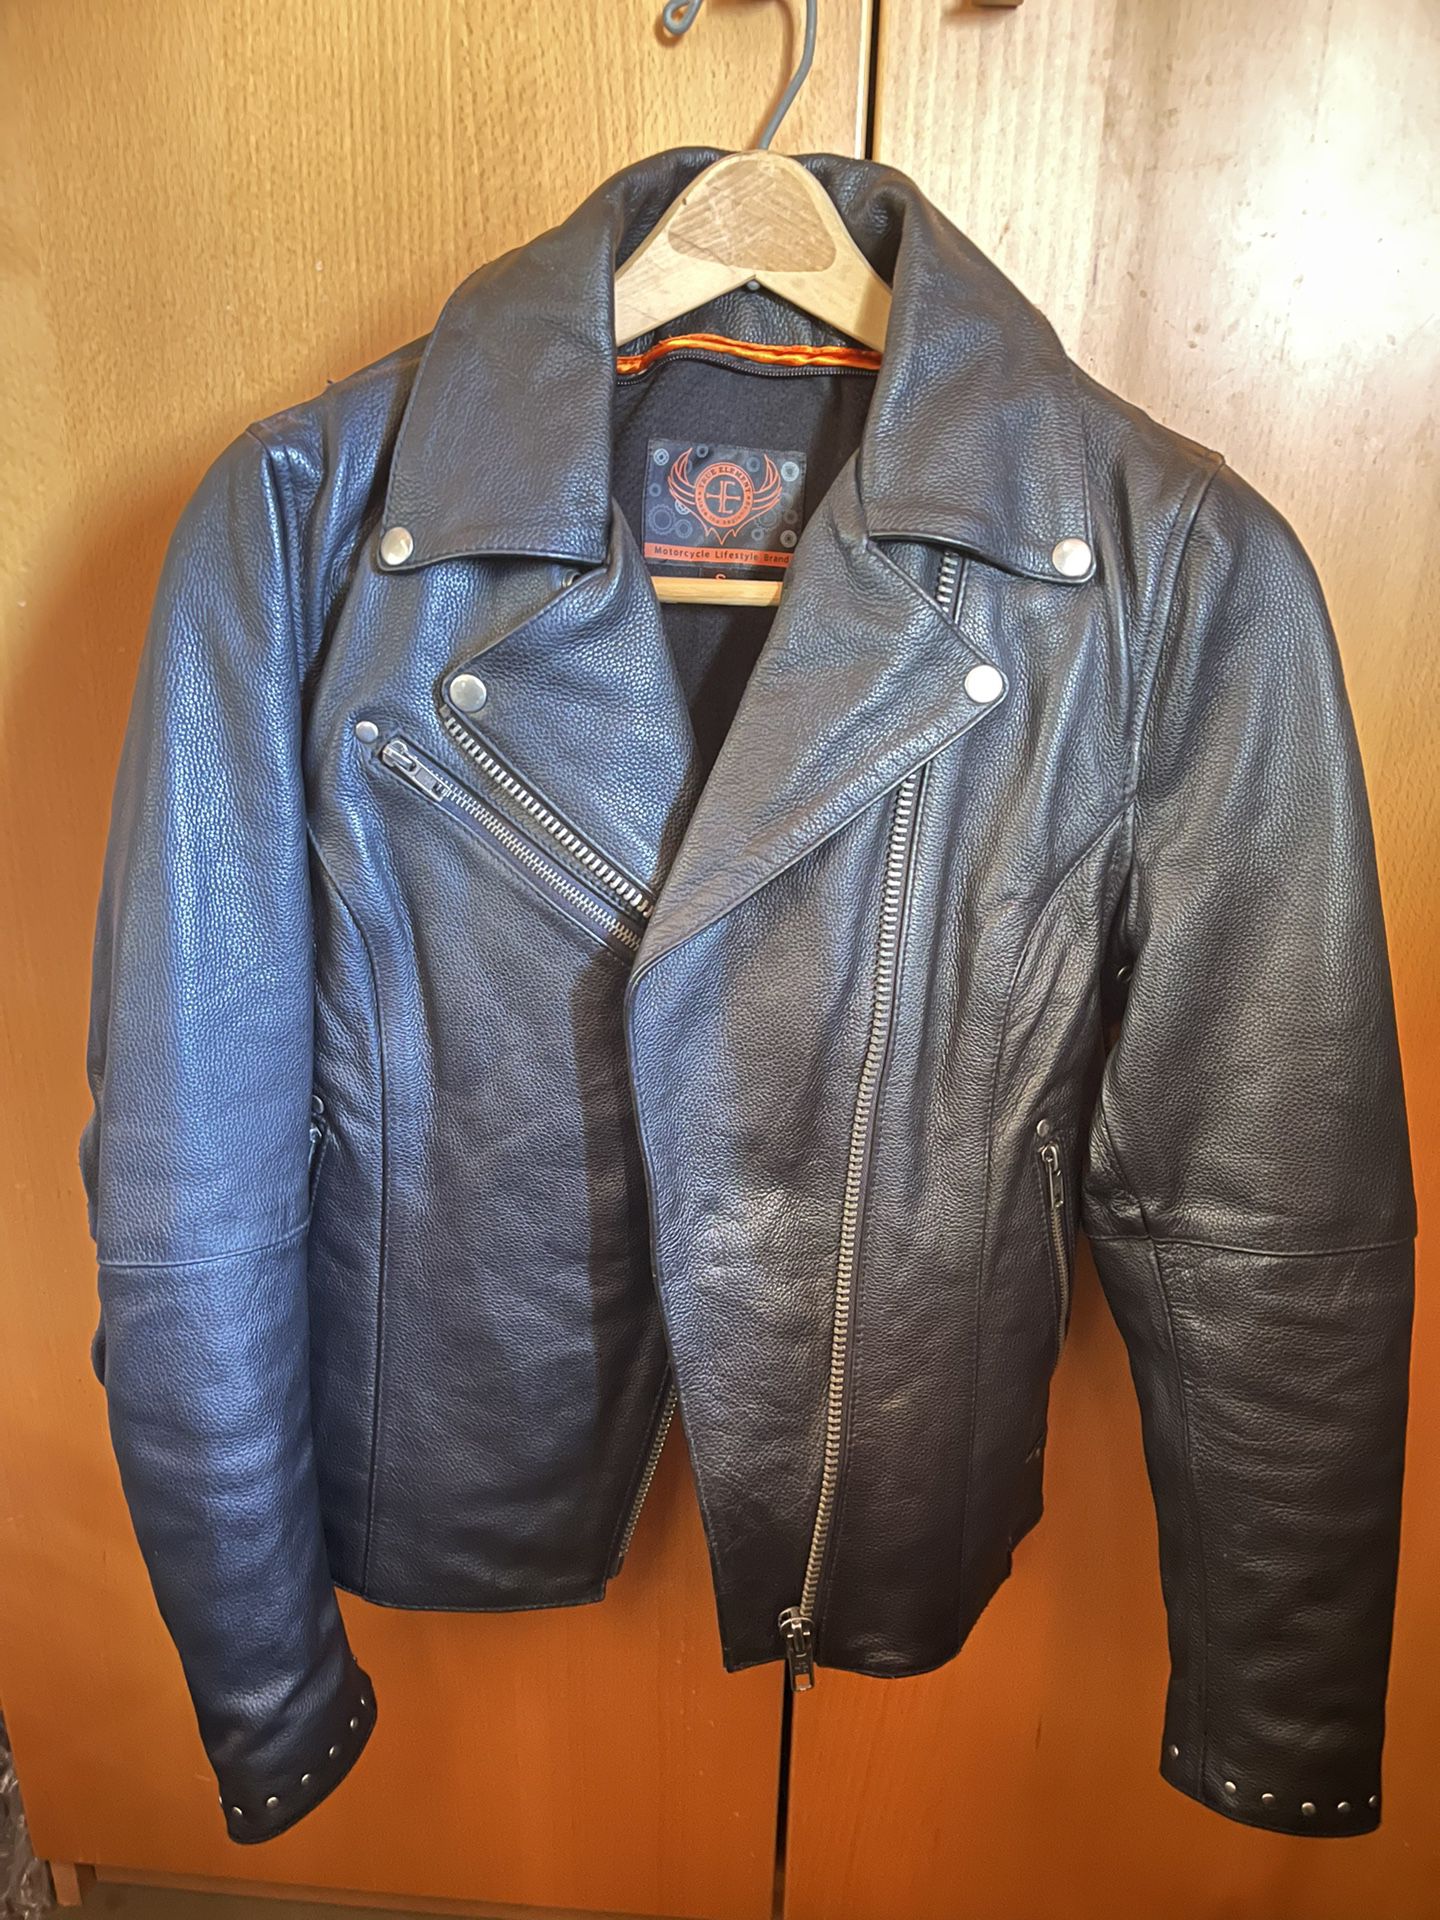 Women’s Black Leather Motorcycle Riding Jacket Size Small